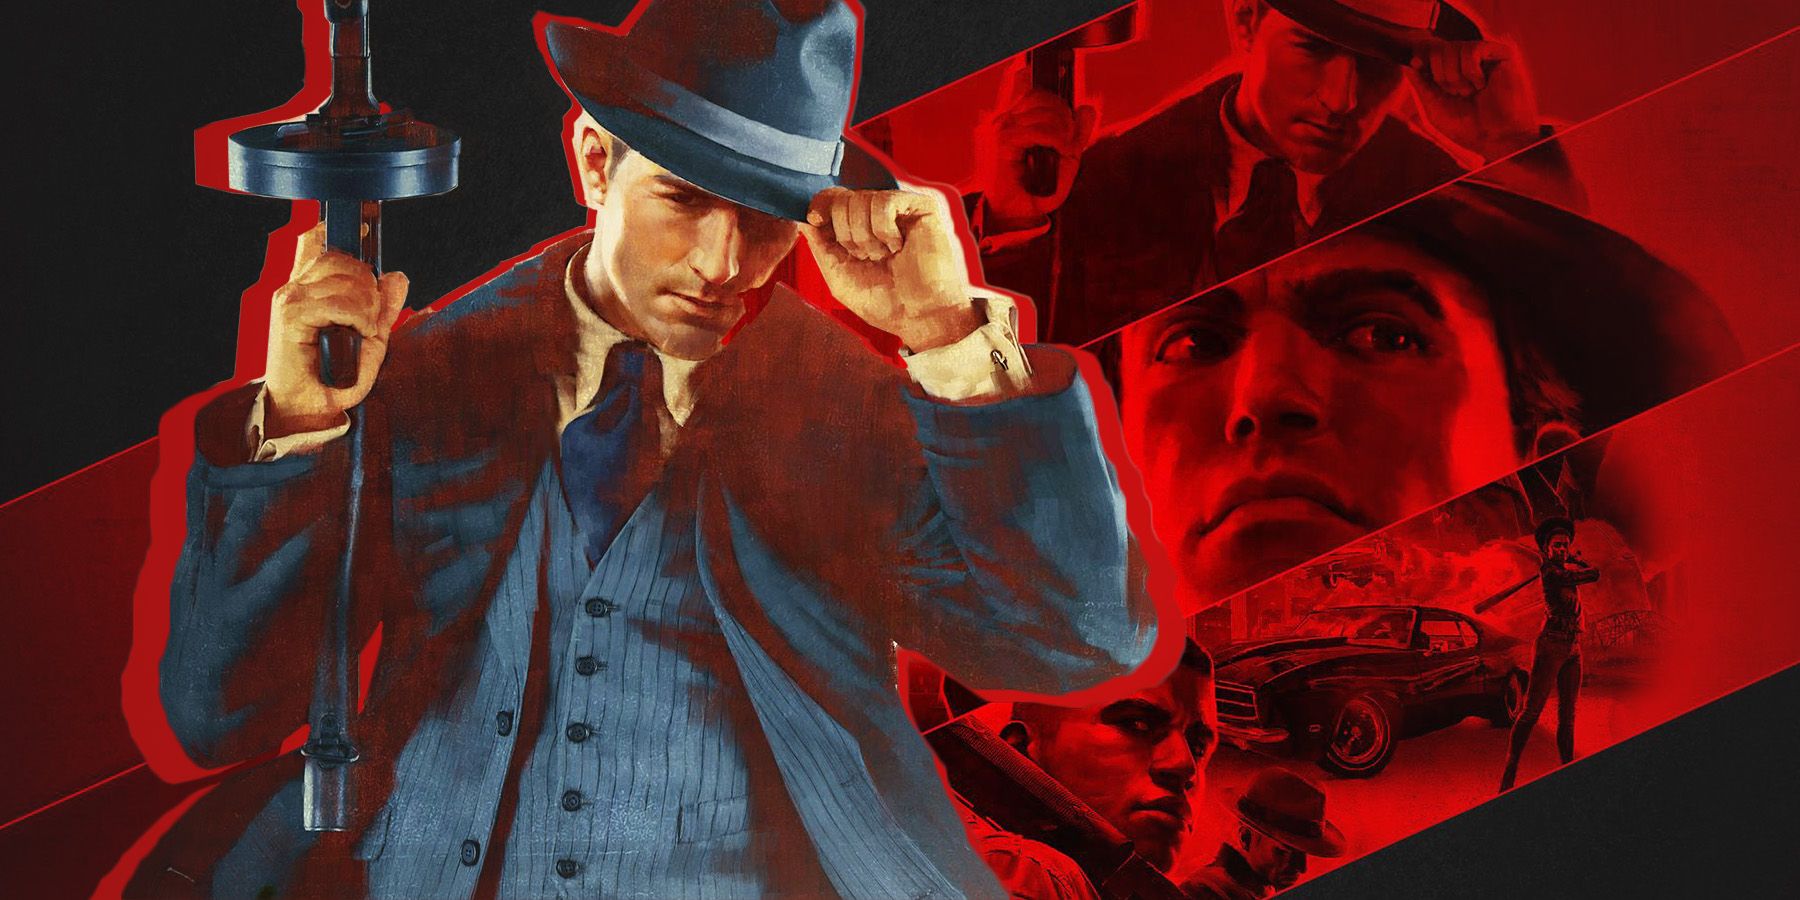 Mafia: Definitive Edition Tommy Angelo cutout artwork in front of collage of all Mafia series protagonists